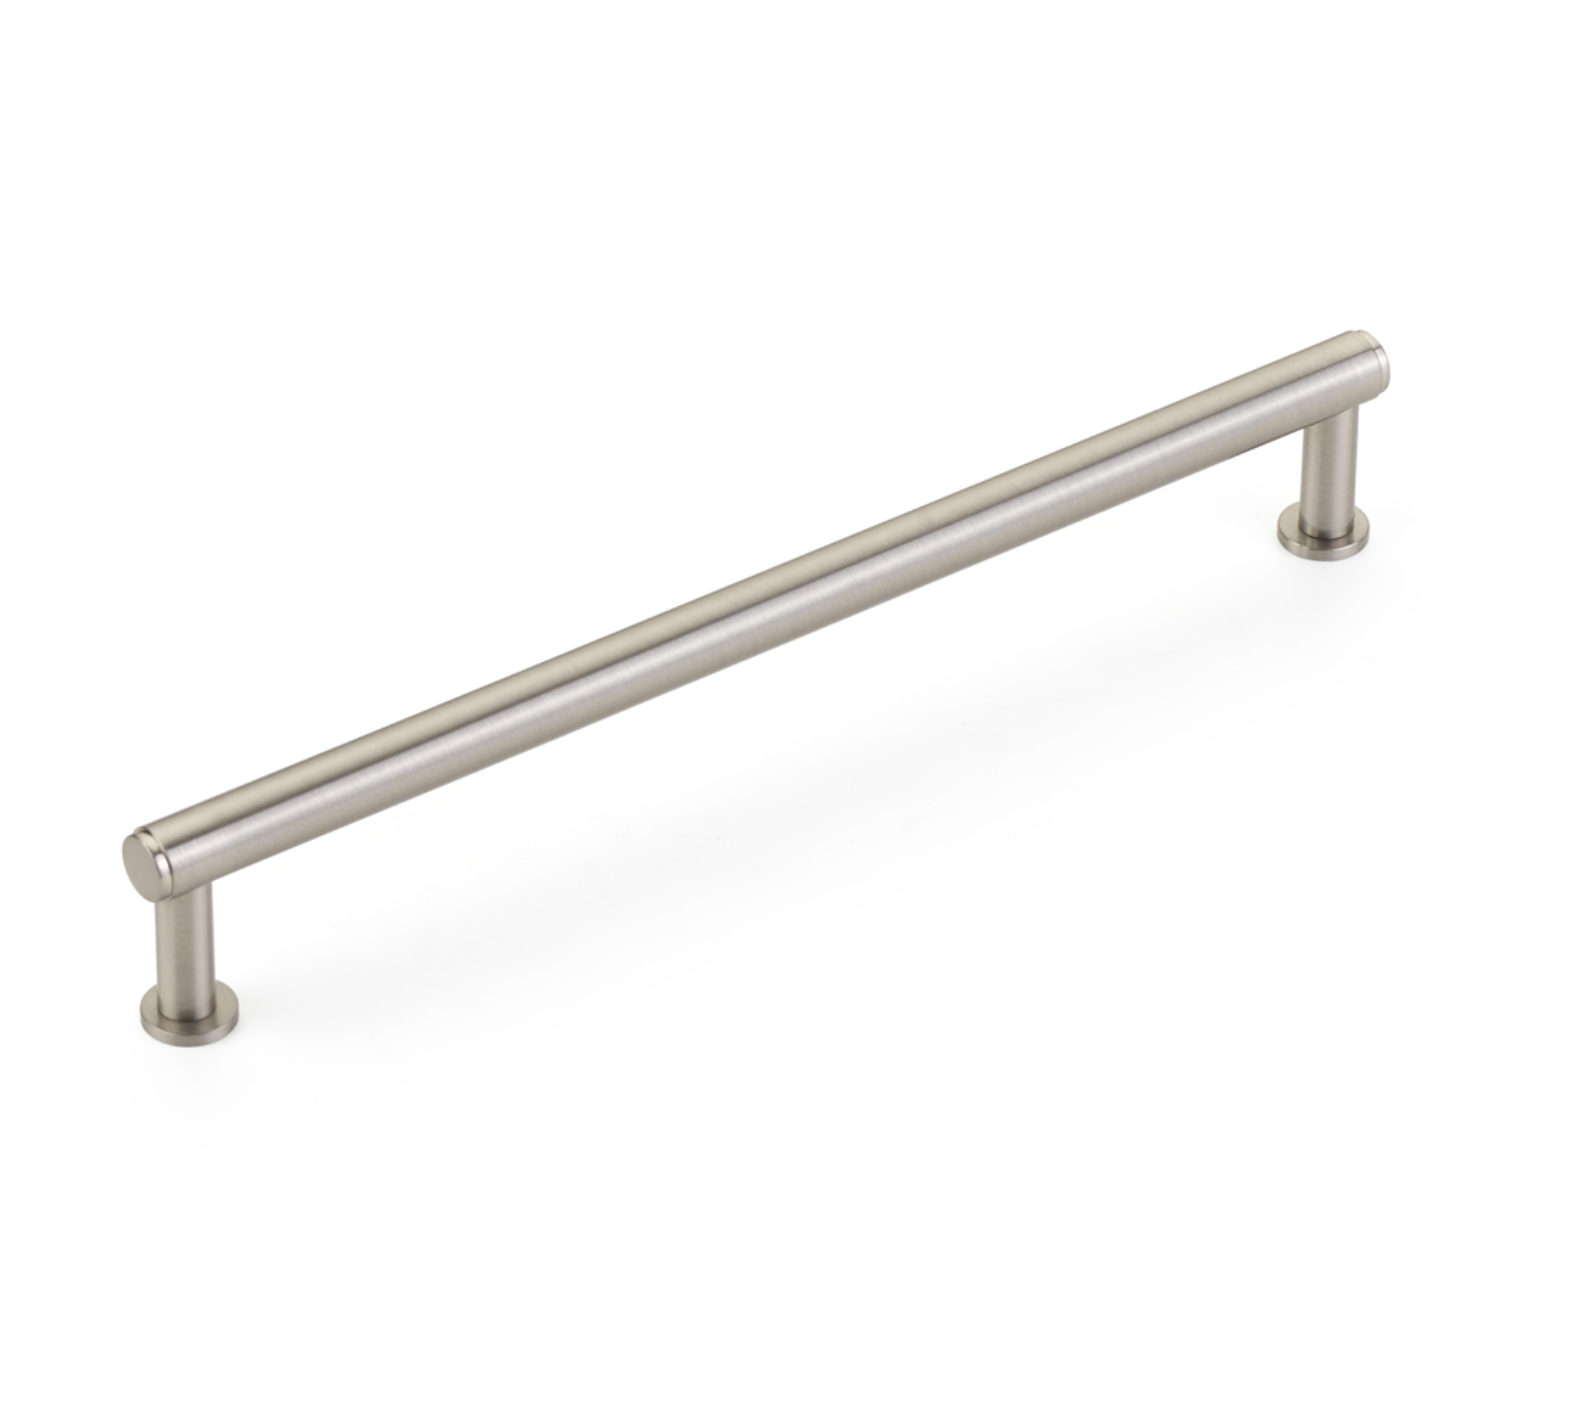 Brushed Nickel "Maison No. 2" Smooth Drawer Pulls and Cabinet Knobs with Optional Backplate - Industry Hardware